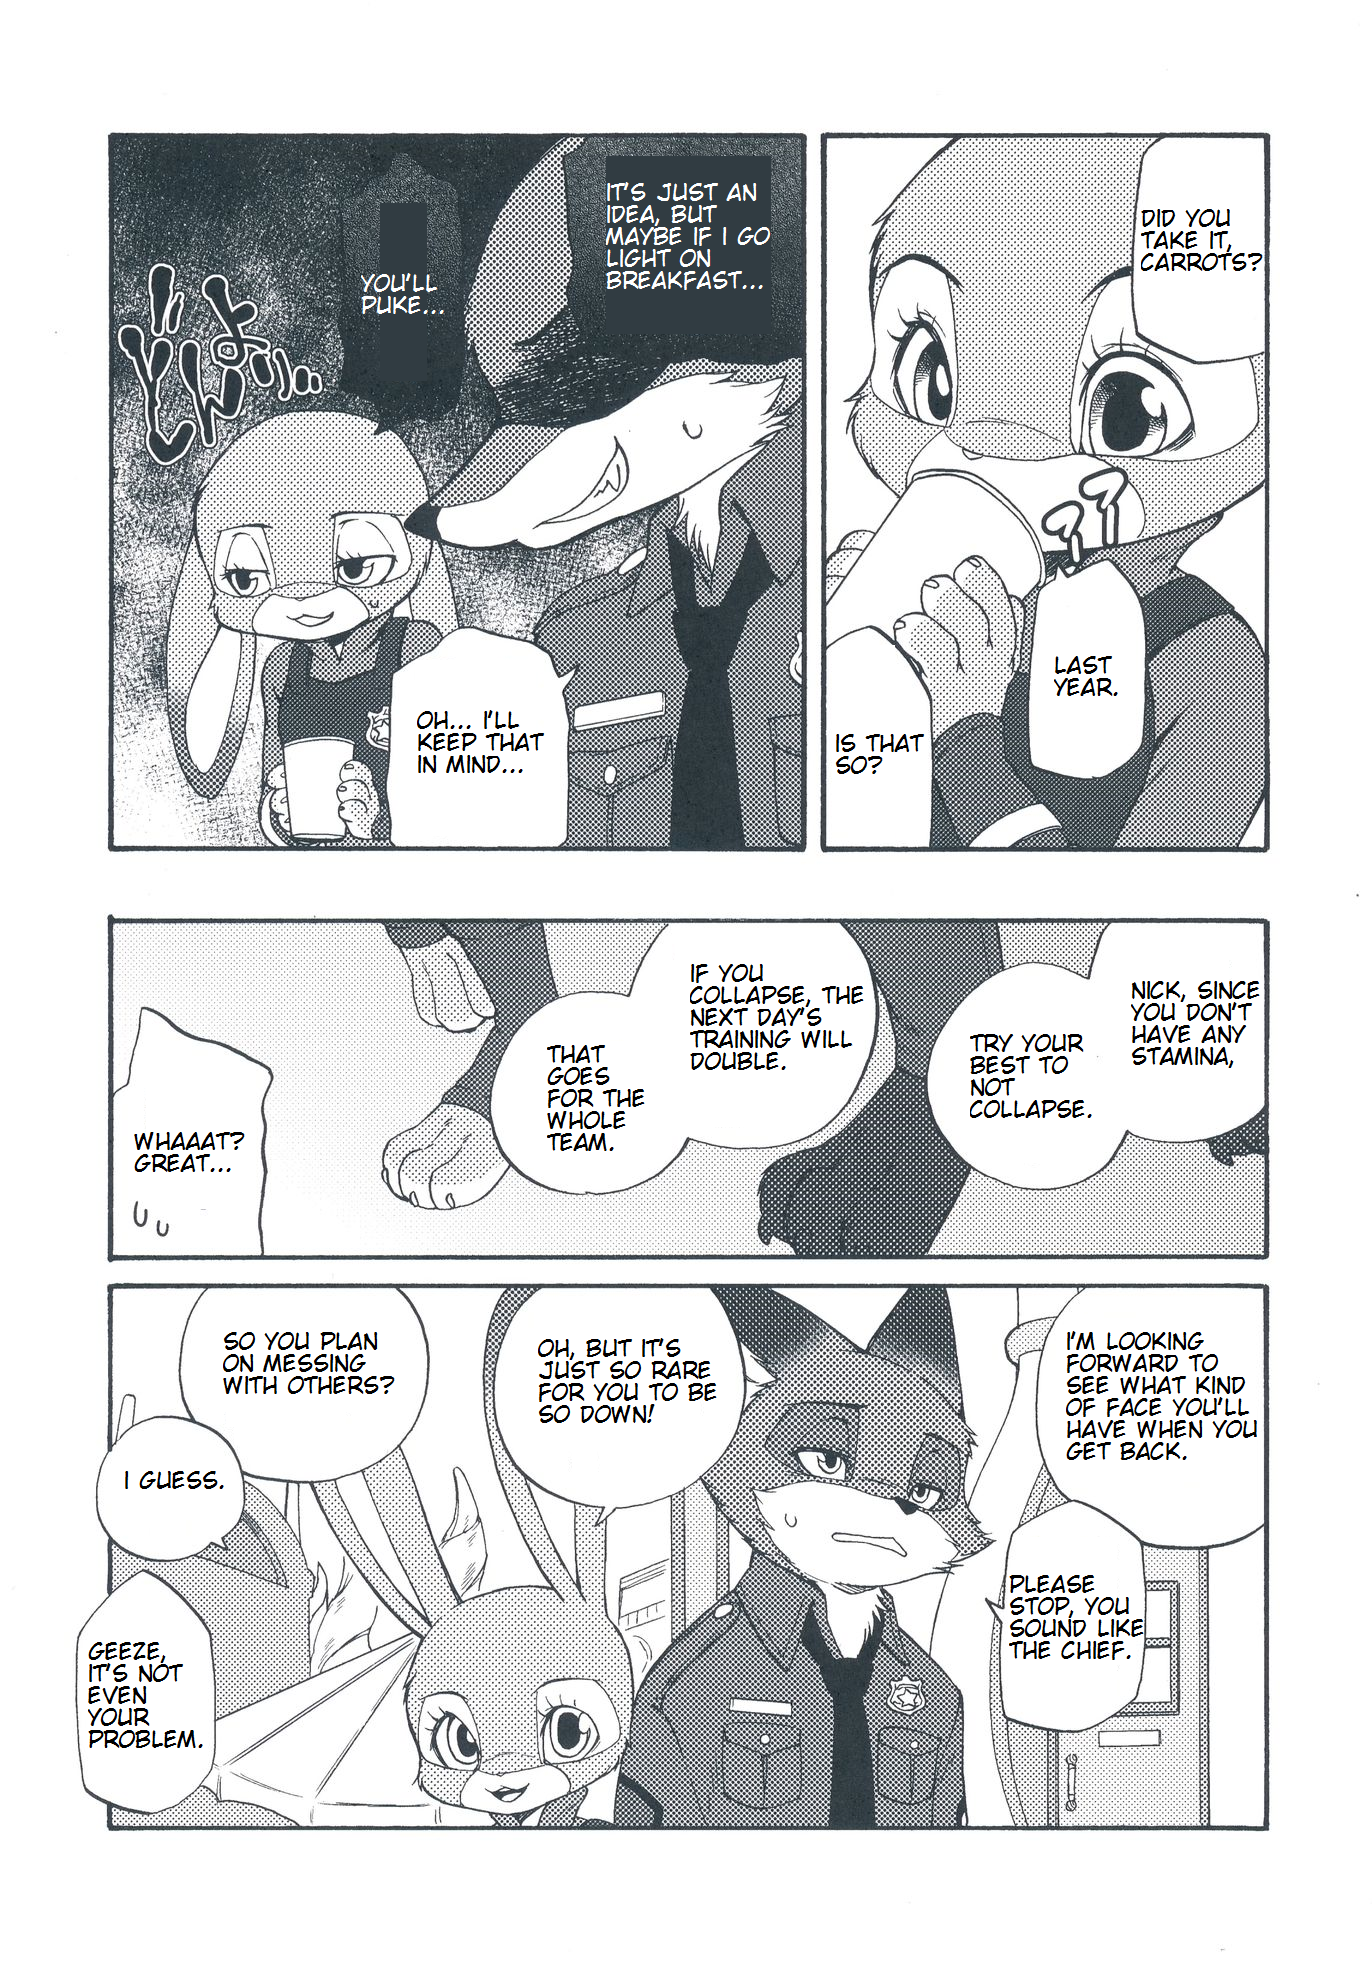 Carrots-For-One-ENG-page005--Gotofap.tk--45188863.png